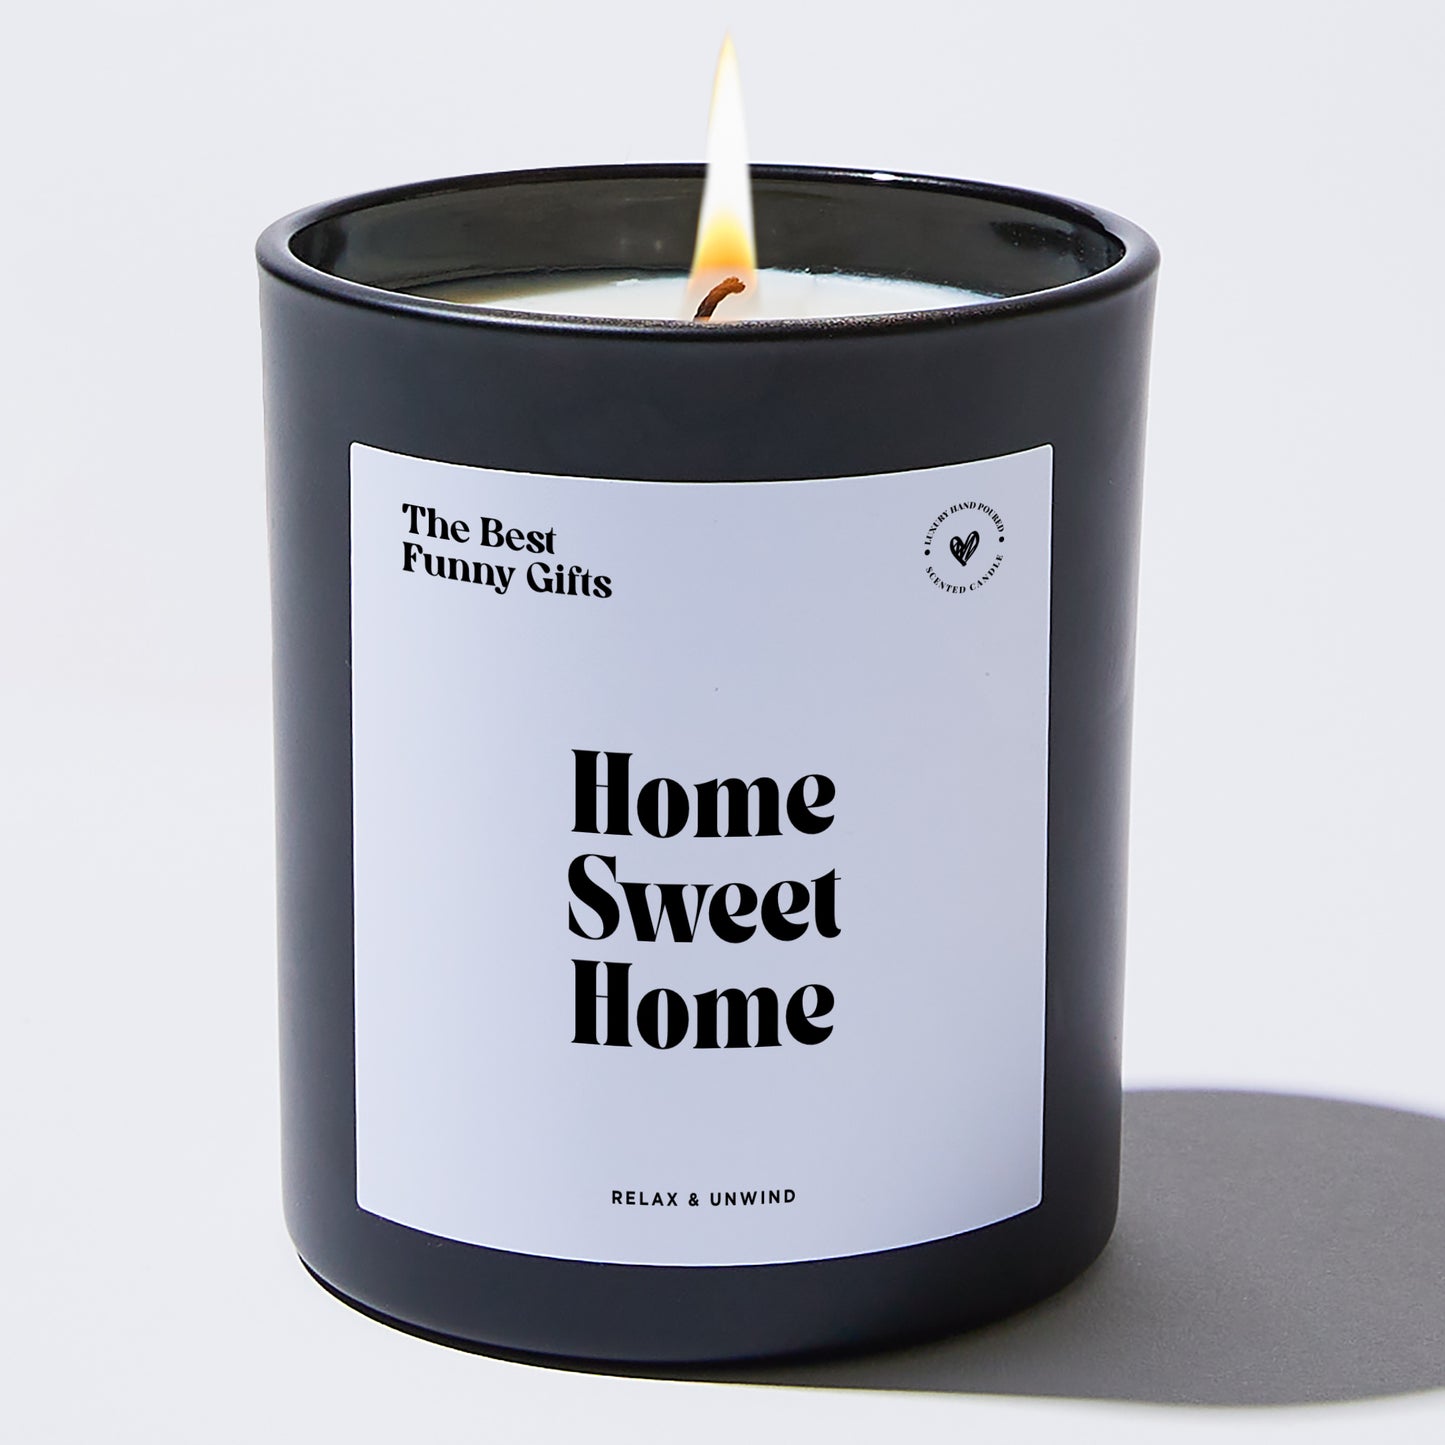 Housewarming Gift Home Sweet Home - The Best Funny Gifts